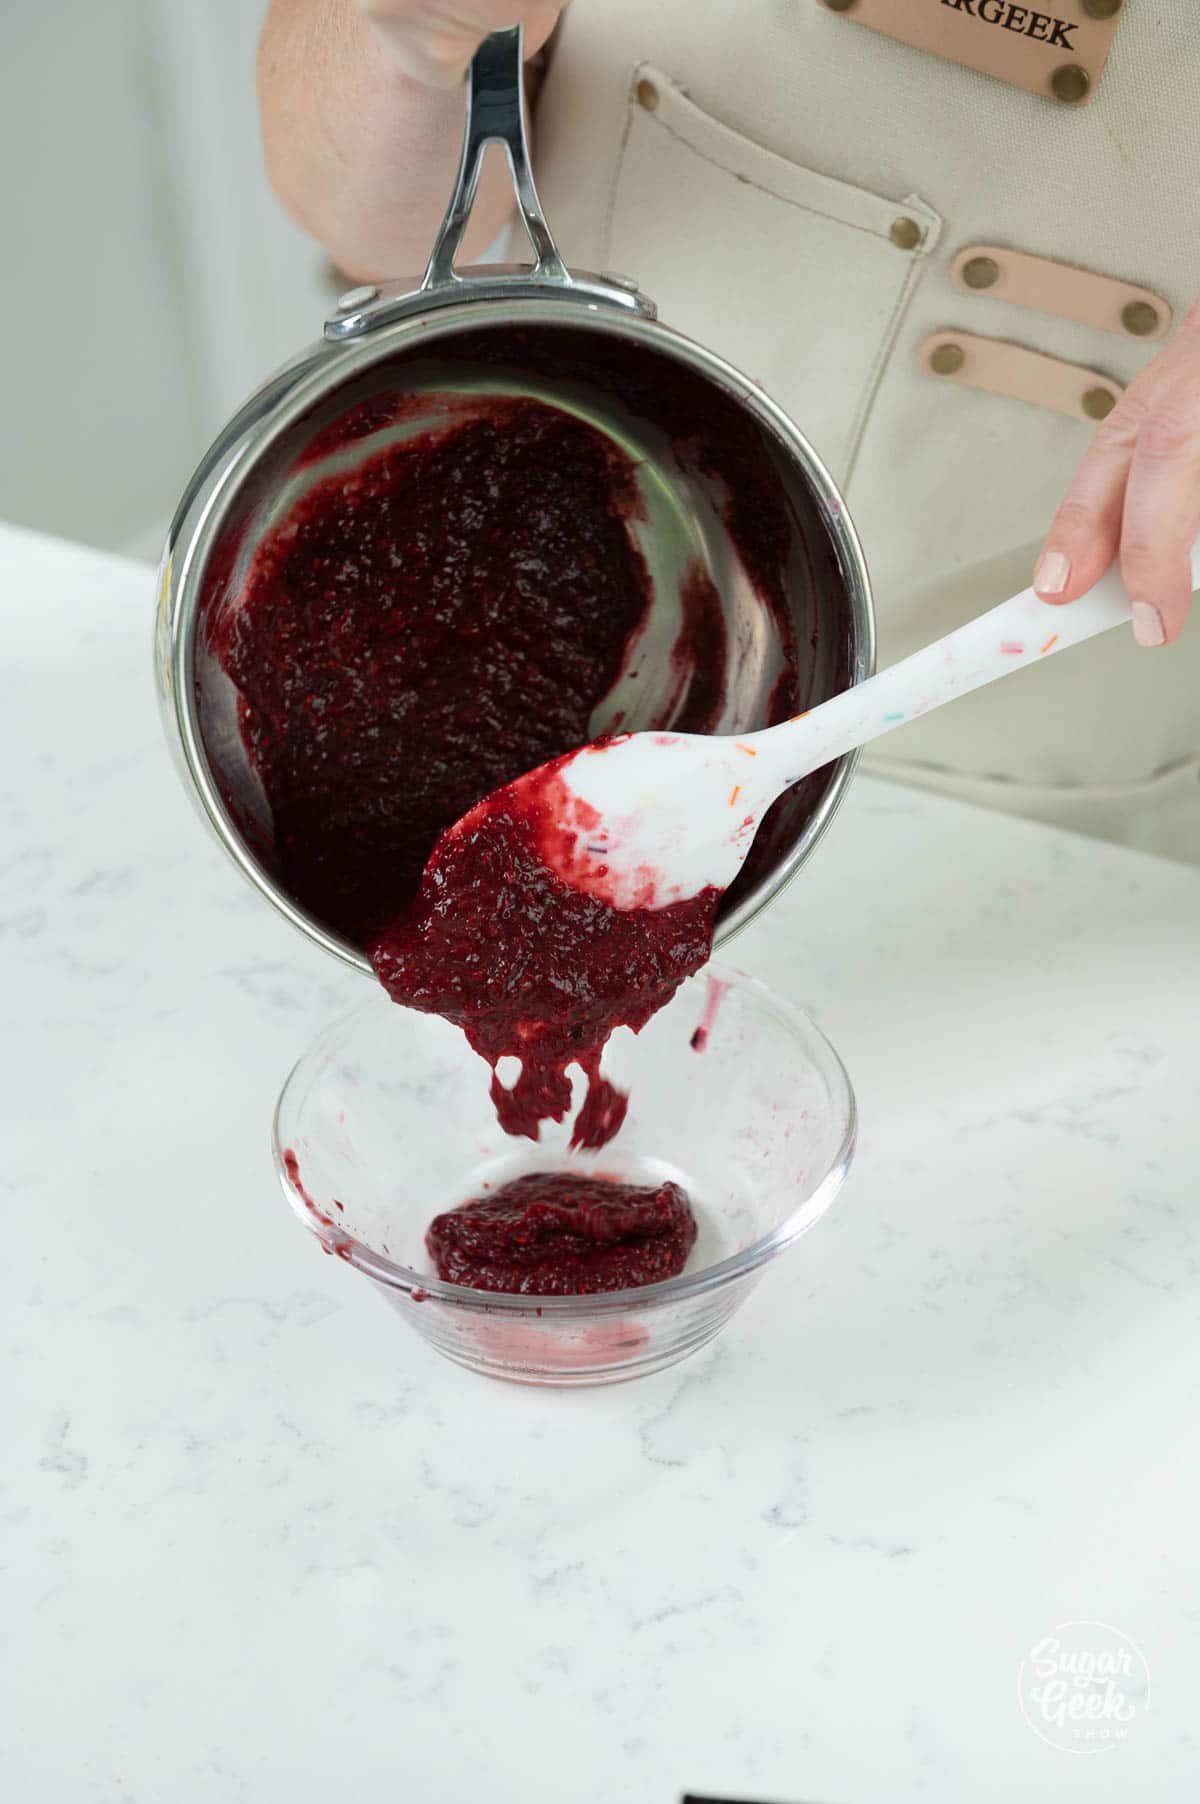 pouring blackberry puree into a glass bowl